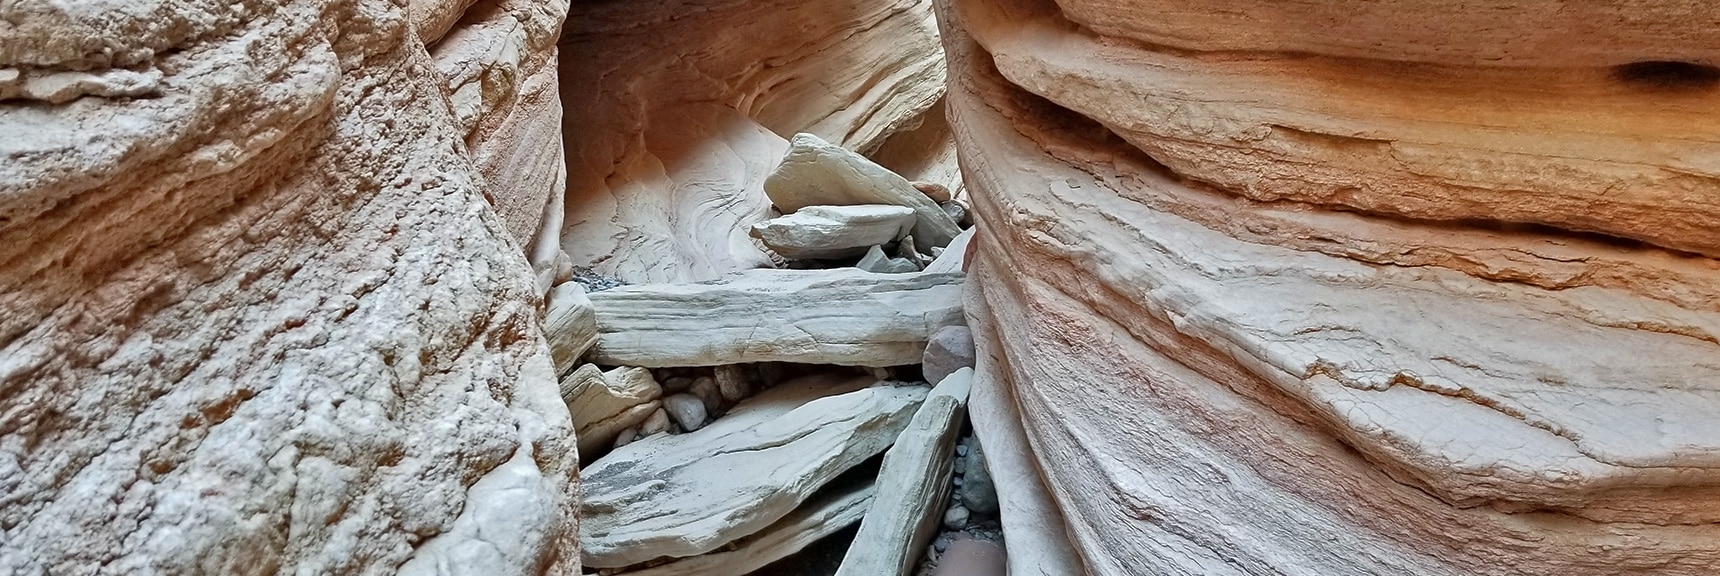 You Don't Want to Be Here During an Earthquake or Flash Flood! | Anniversary Narrows | Muddy Mountains Wilderness, Nevada